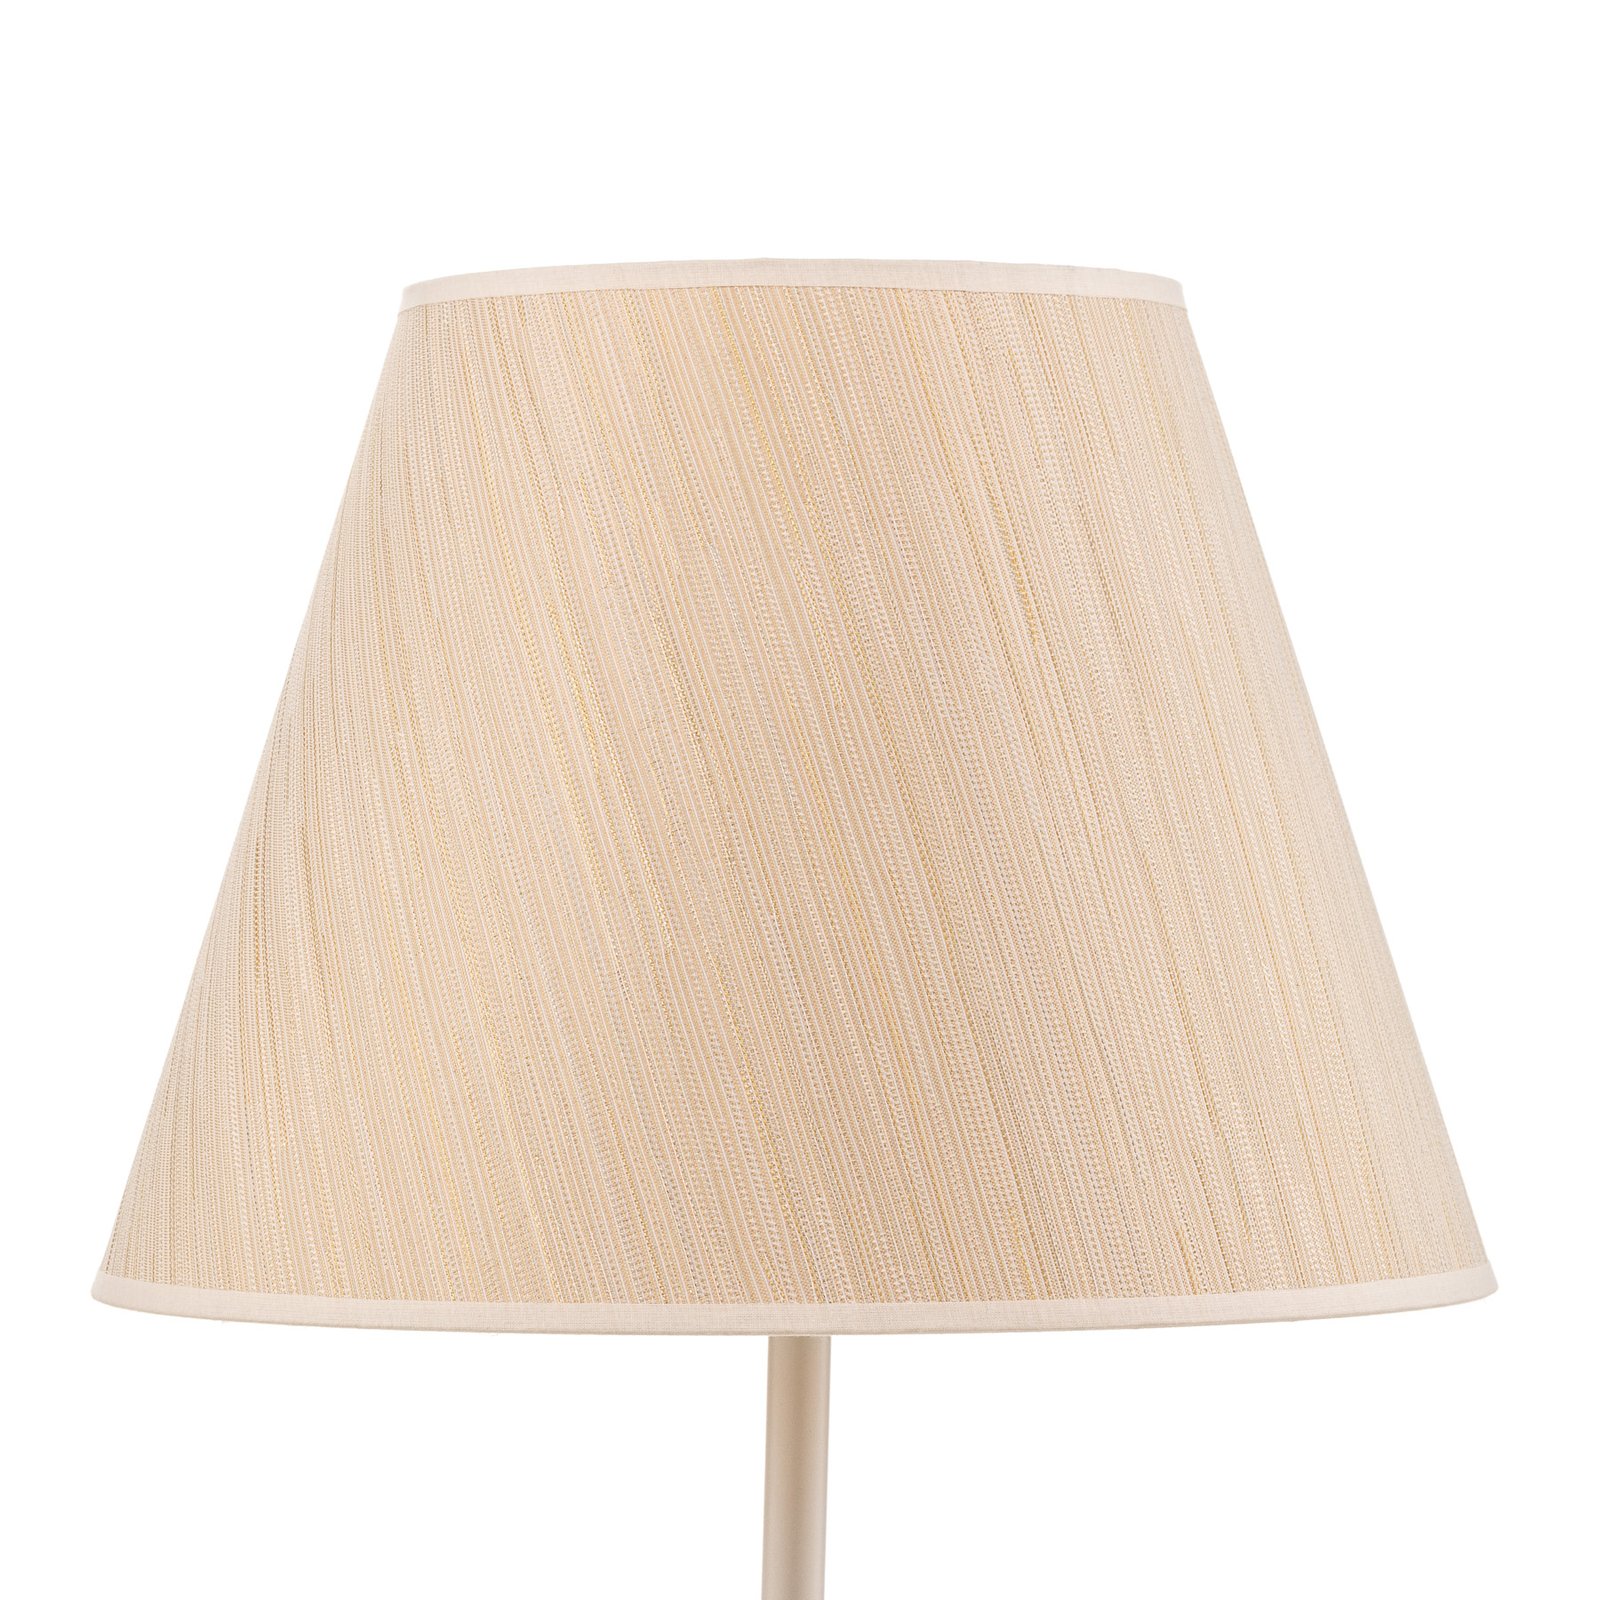 Sofia lampshade height 26 cm, white/gold striped